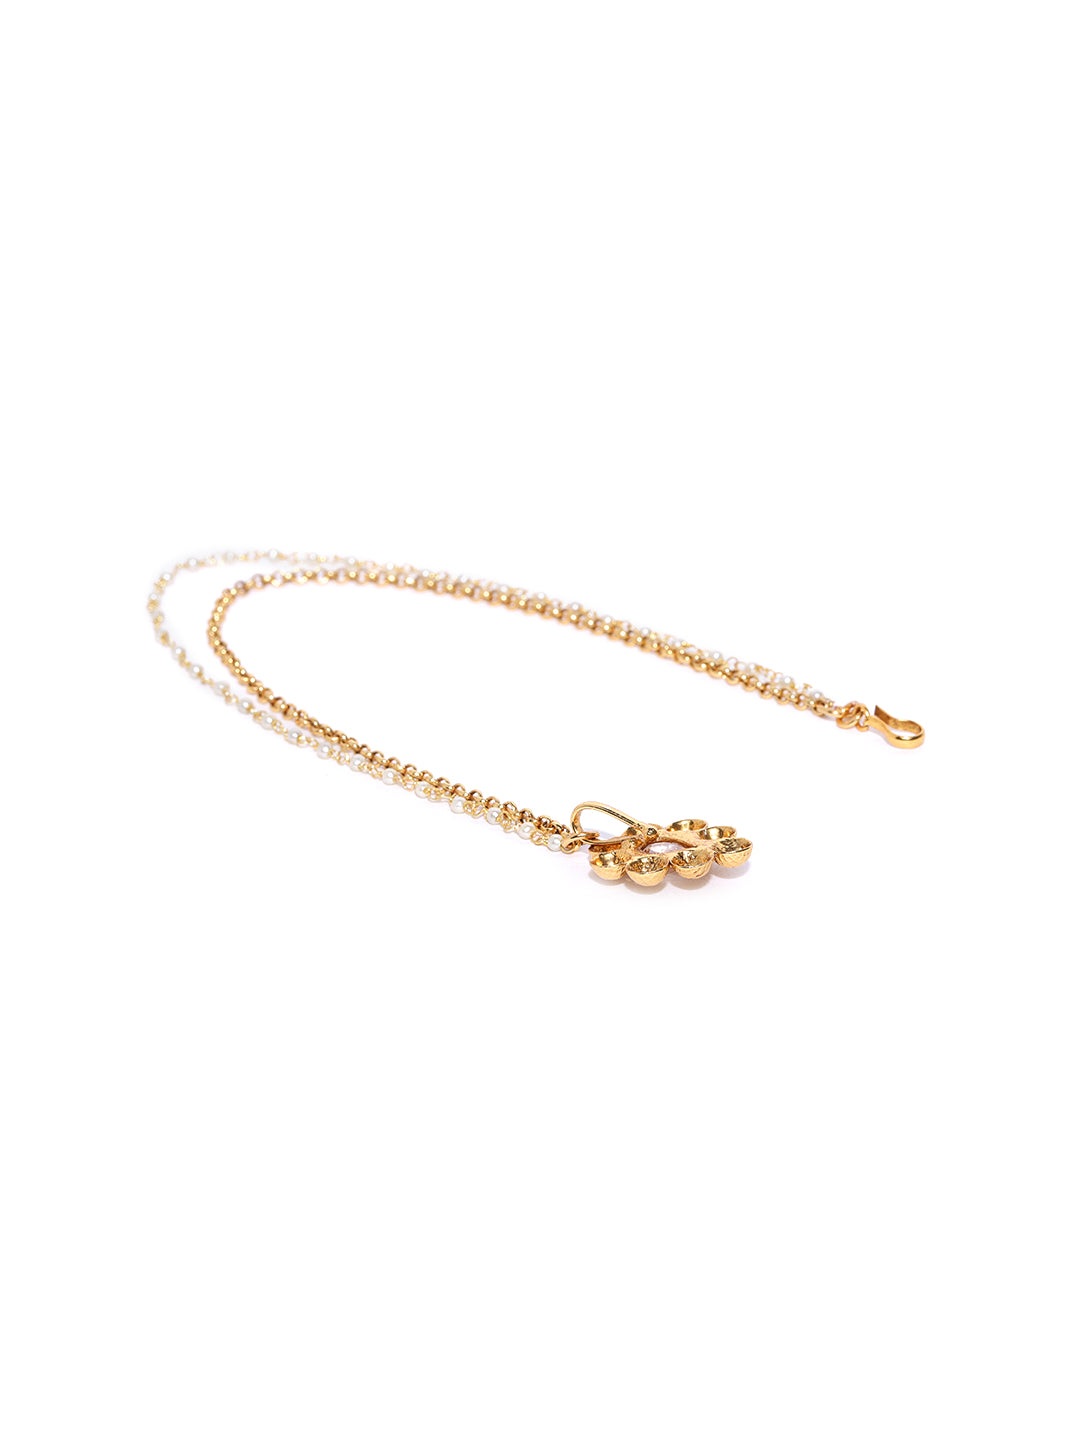 Gold-Plated Studded Dual Chain Nath/Nose Ring